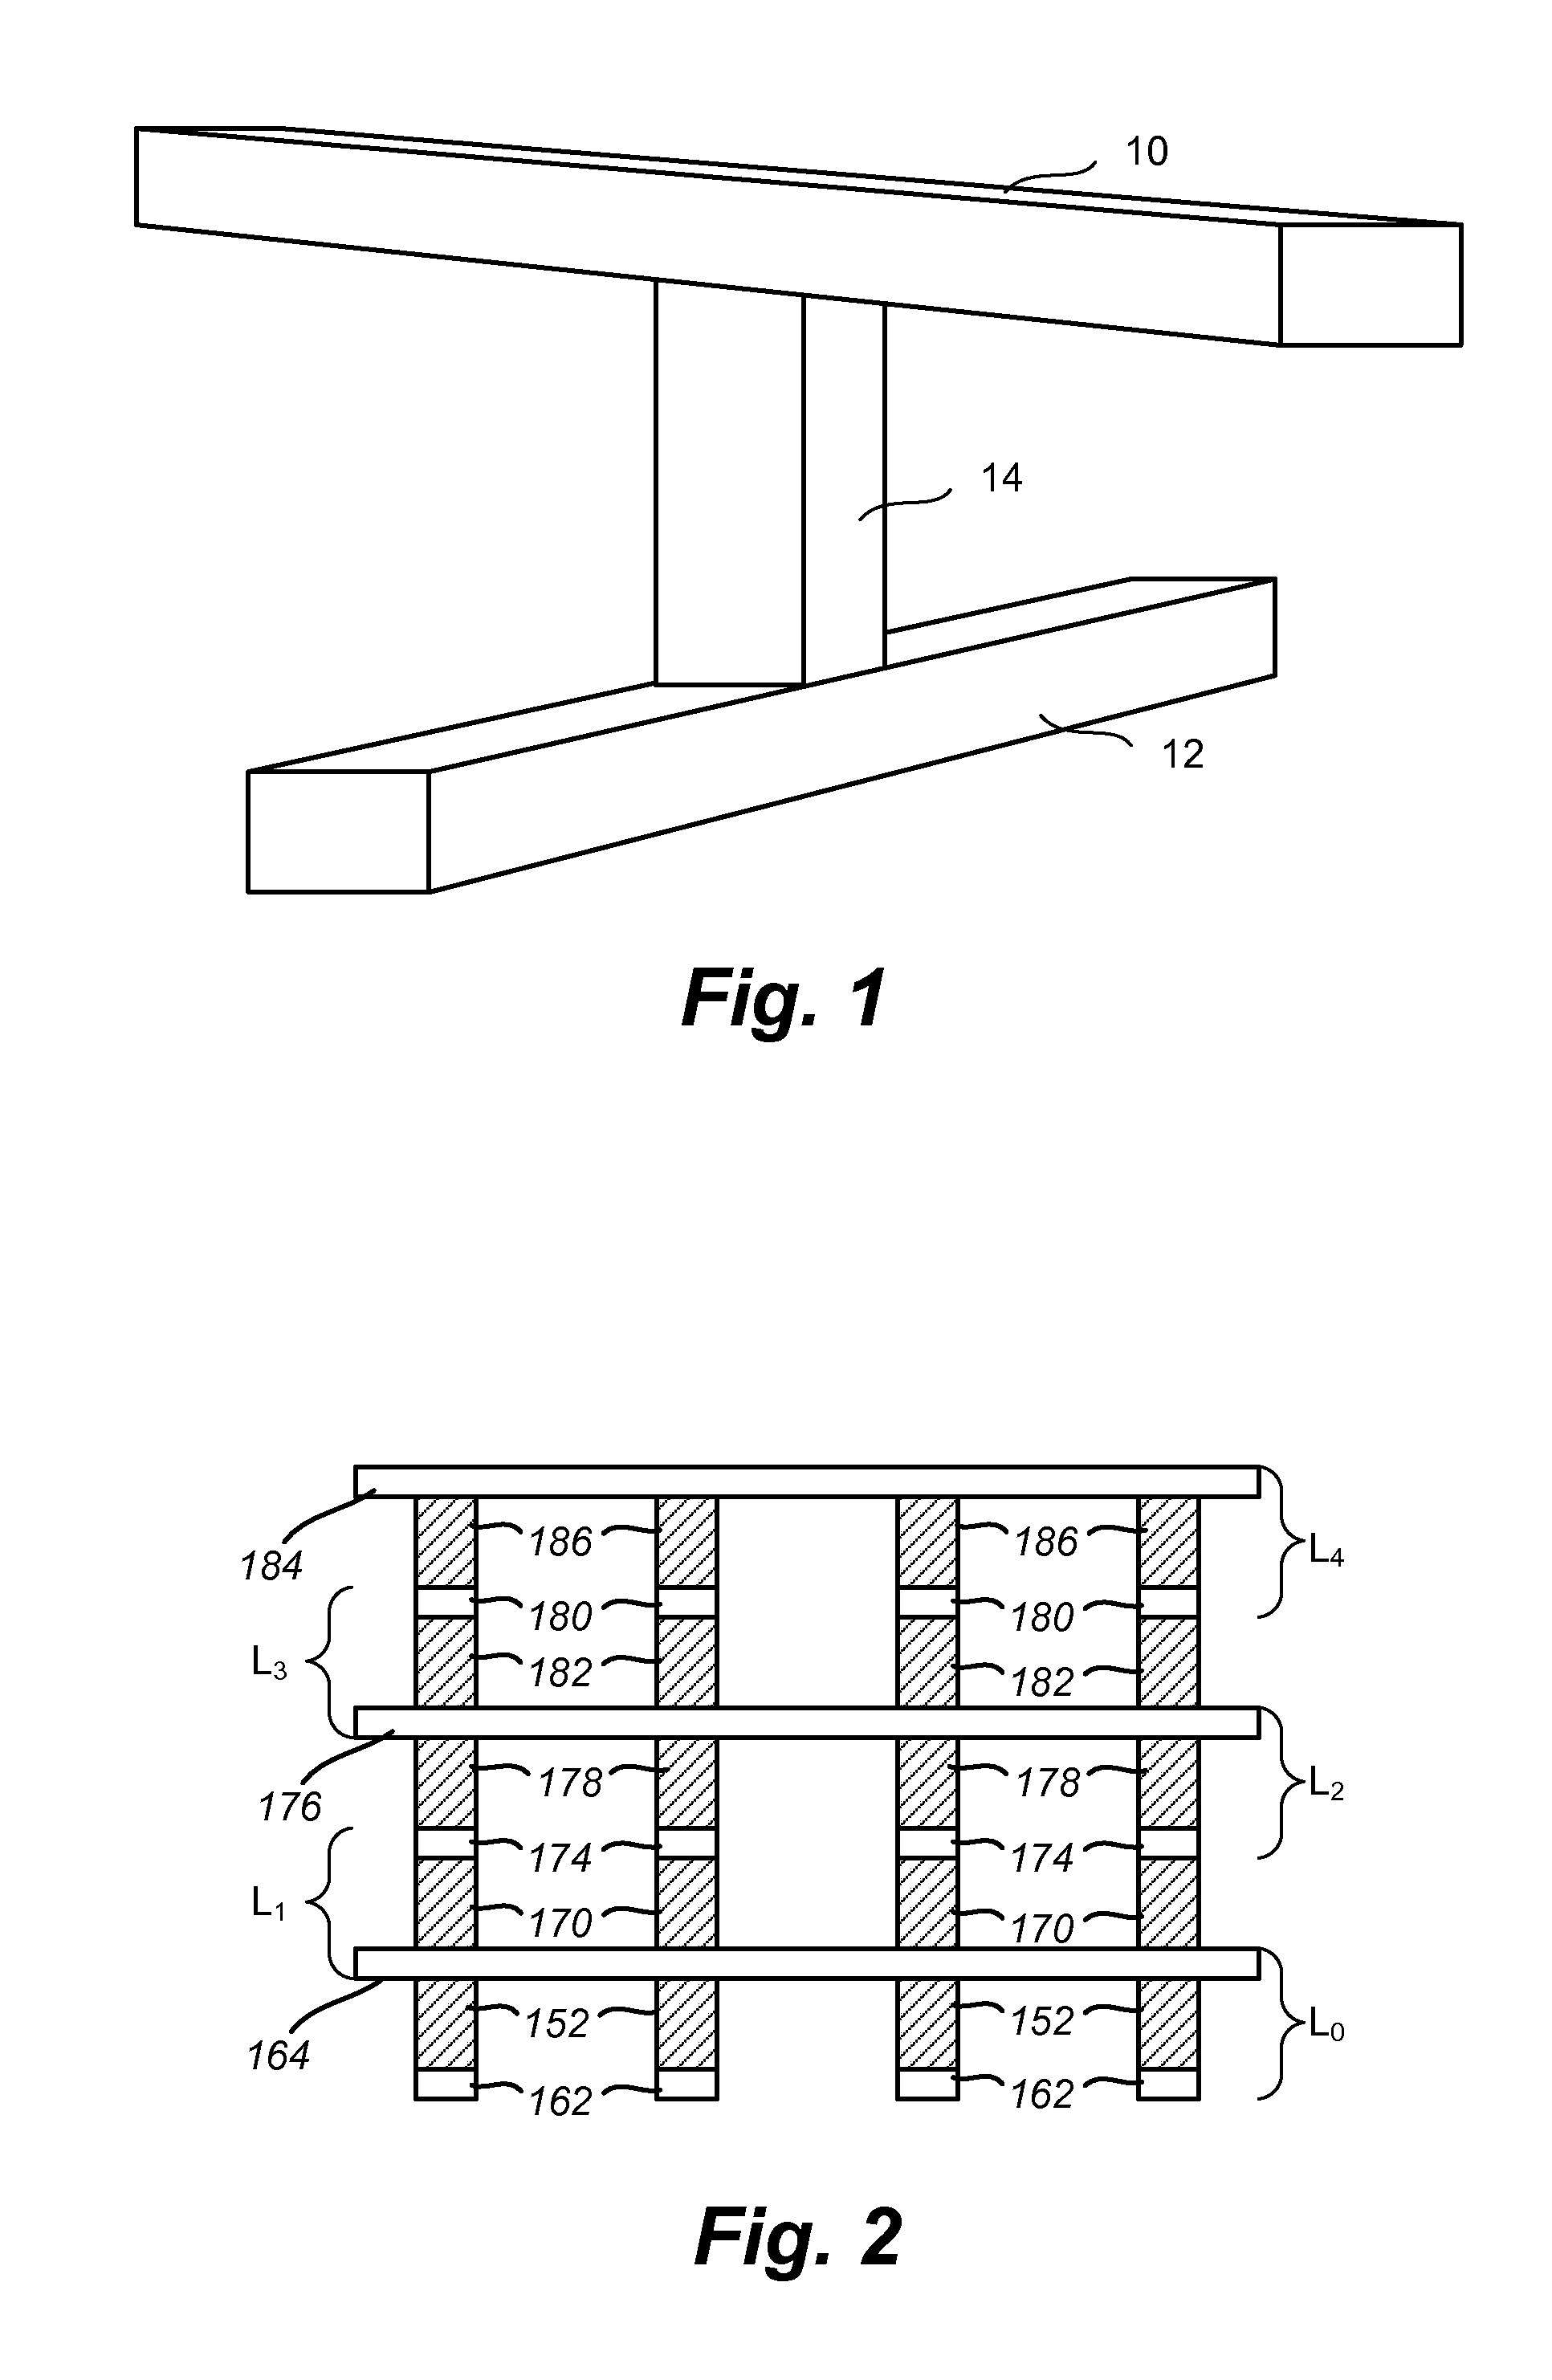 Multi-Bit Resistance-Switching Memory Cell